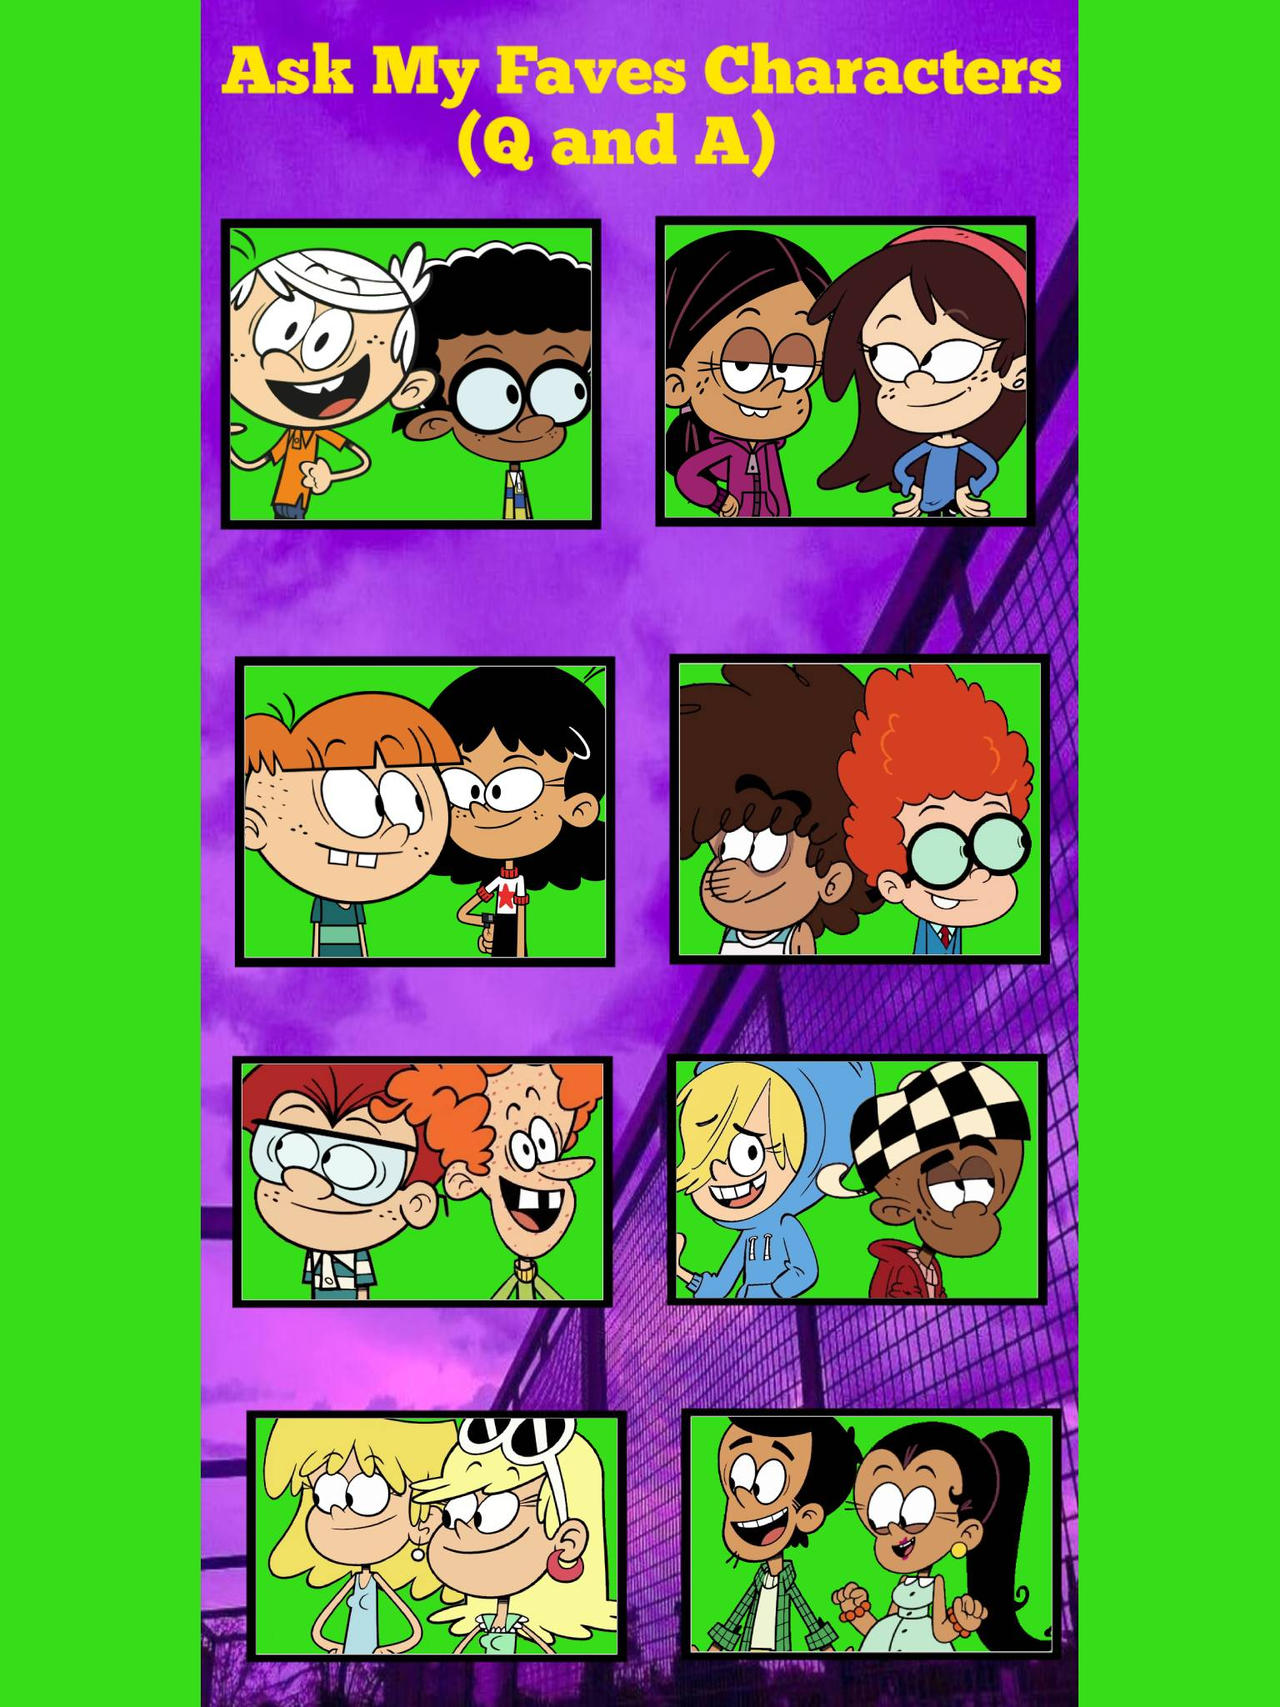 The Loud House Theatre Club Students by brianramos97 on DeviantArt